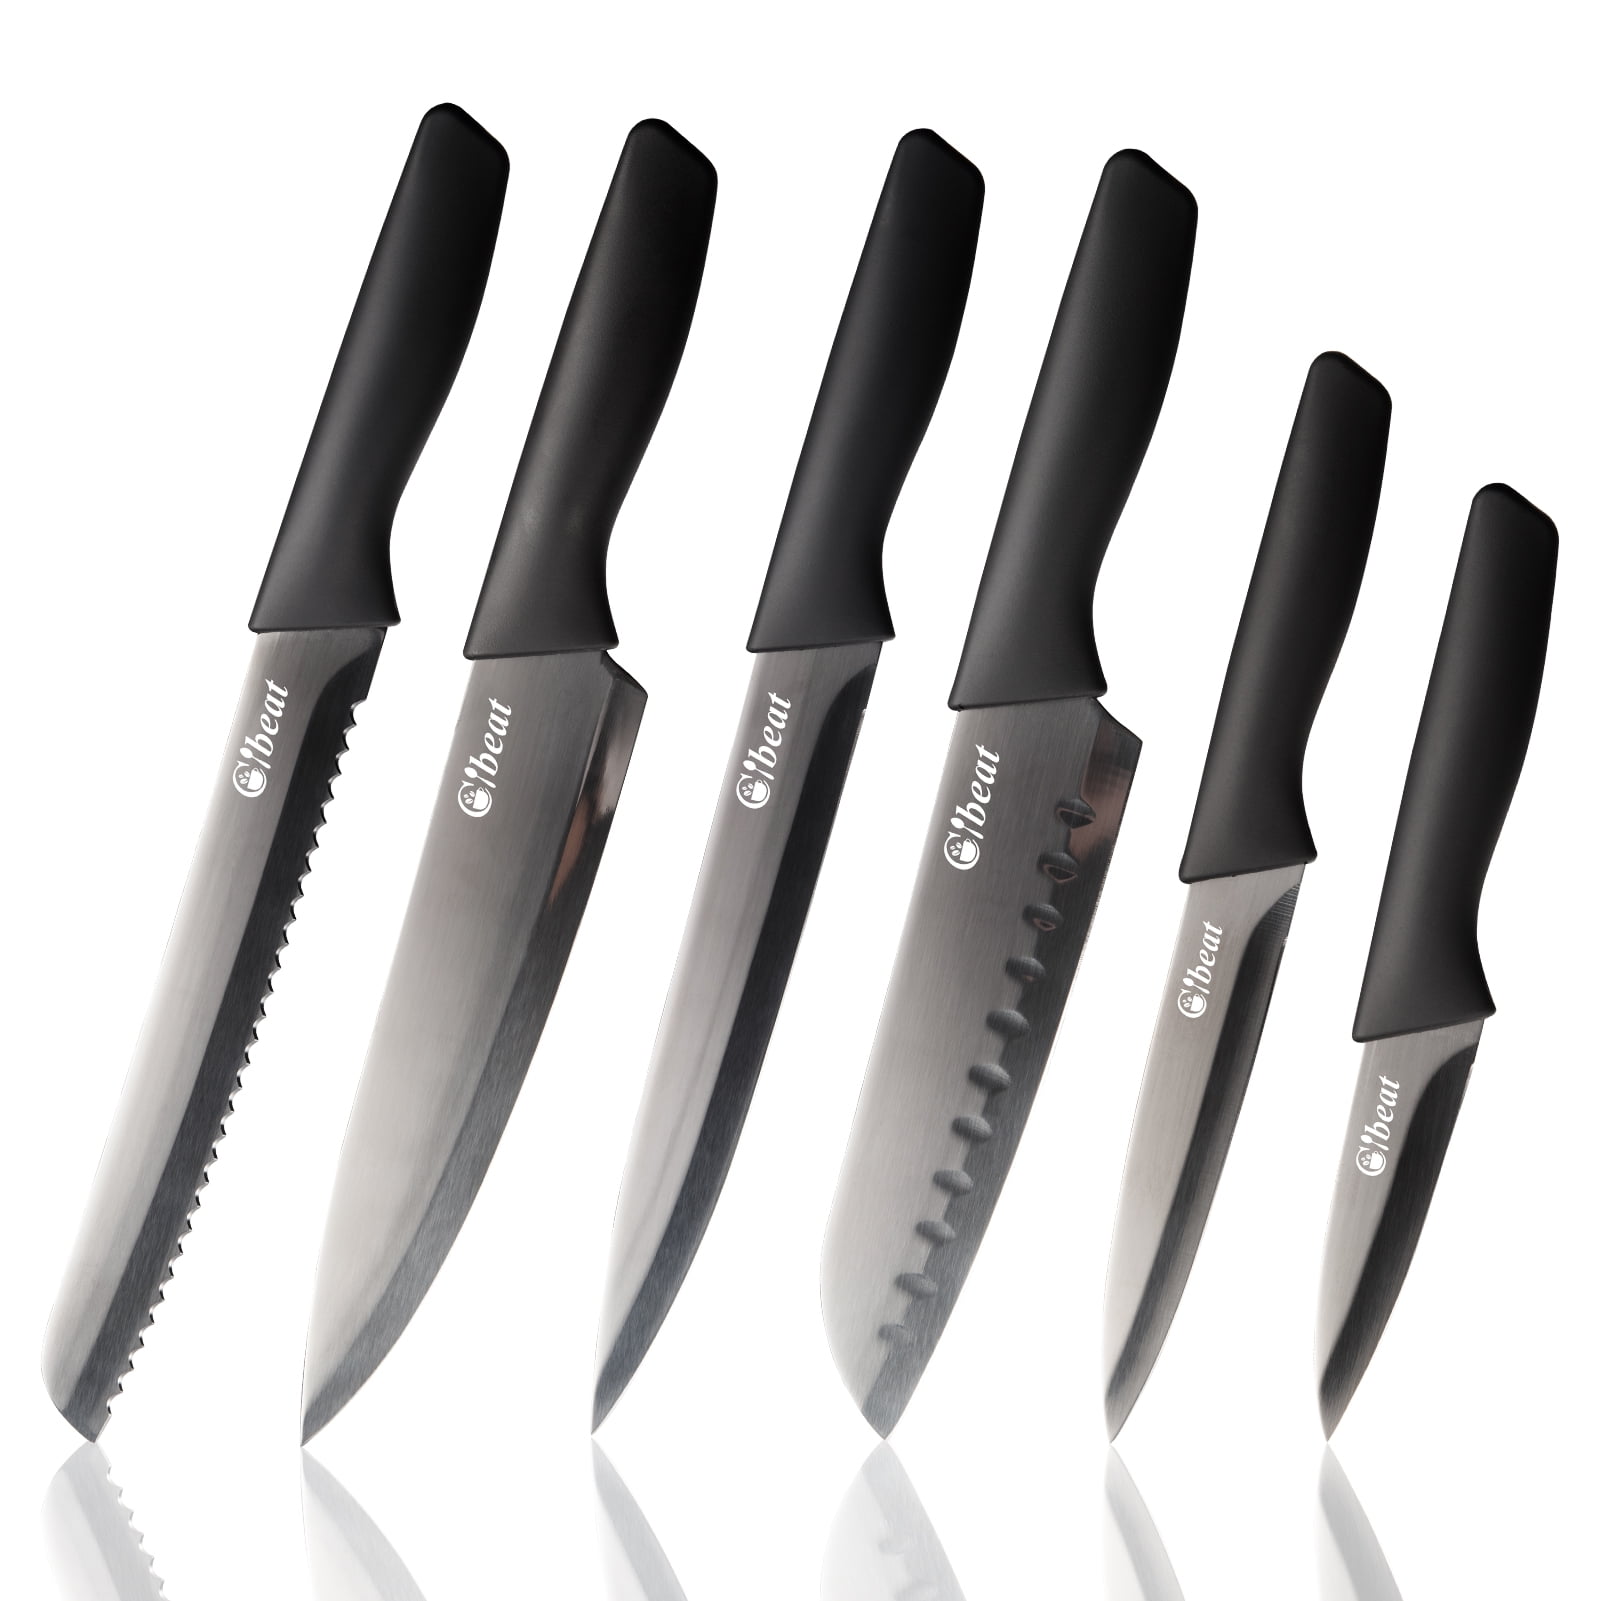 KEEMAKE Kitchen Knife Set Without Block, Professional Sharp Chef Knife Set  With German 4116 Stainless Steel Cooking Knives Set For Kitchen With  Pakkawood Handle, 6 Piece In Elegant Gift Box on Galleon Philippines